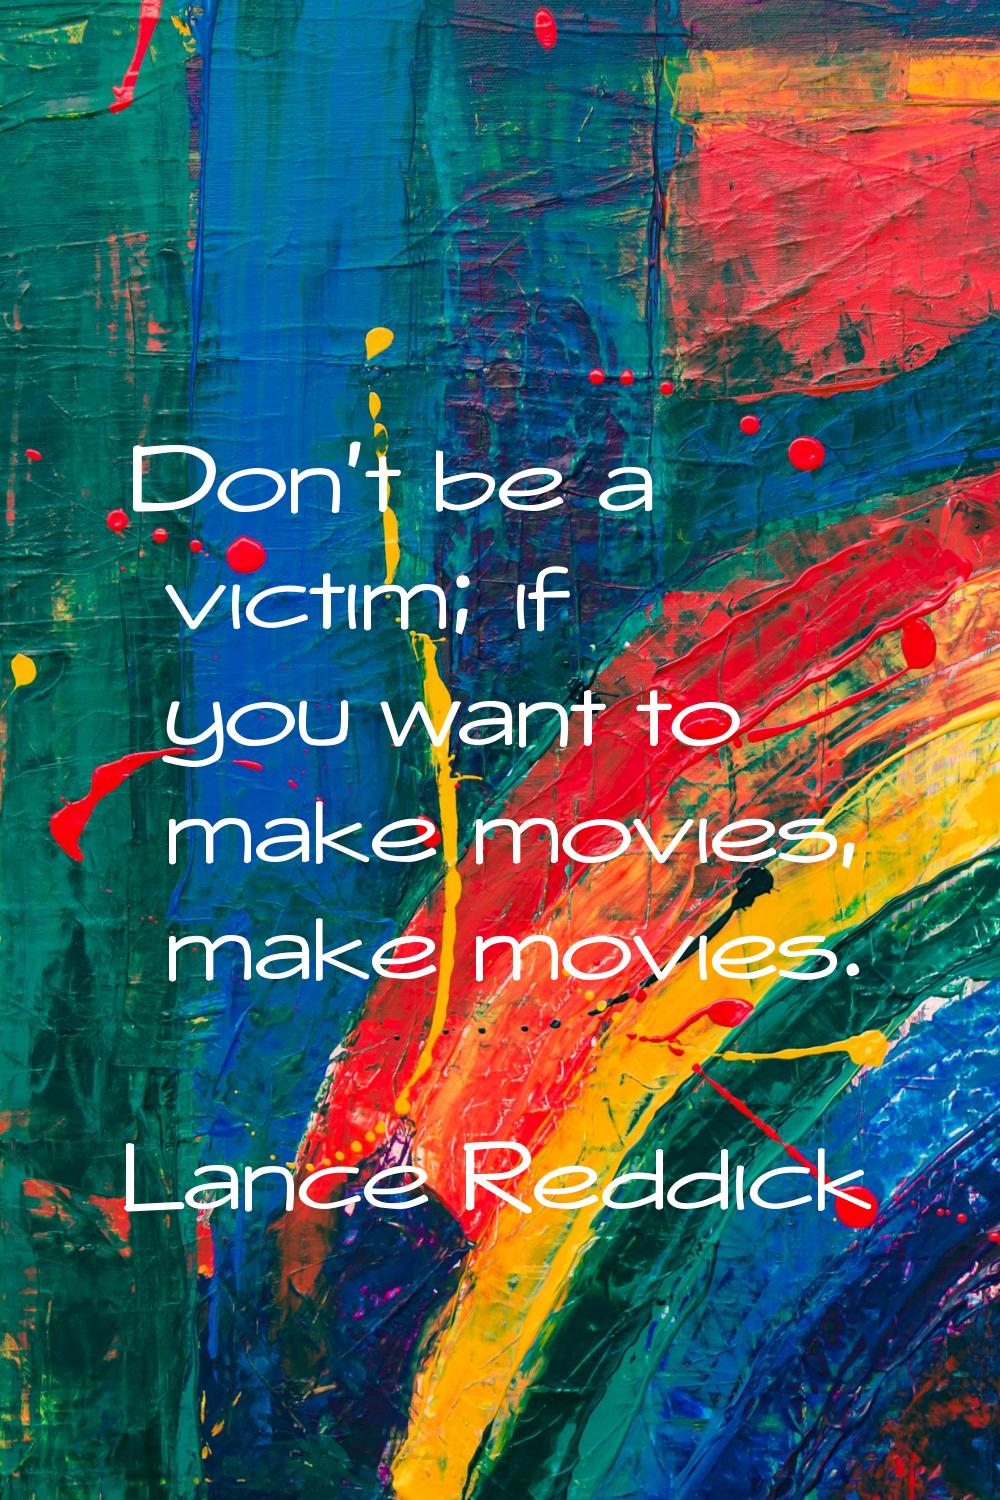 Don't be a victim; if you want to make movies, make movies.